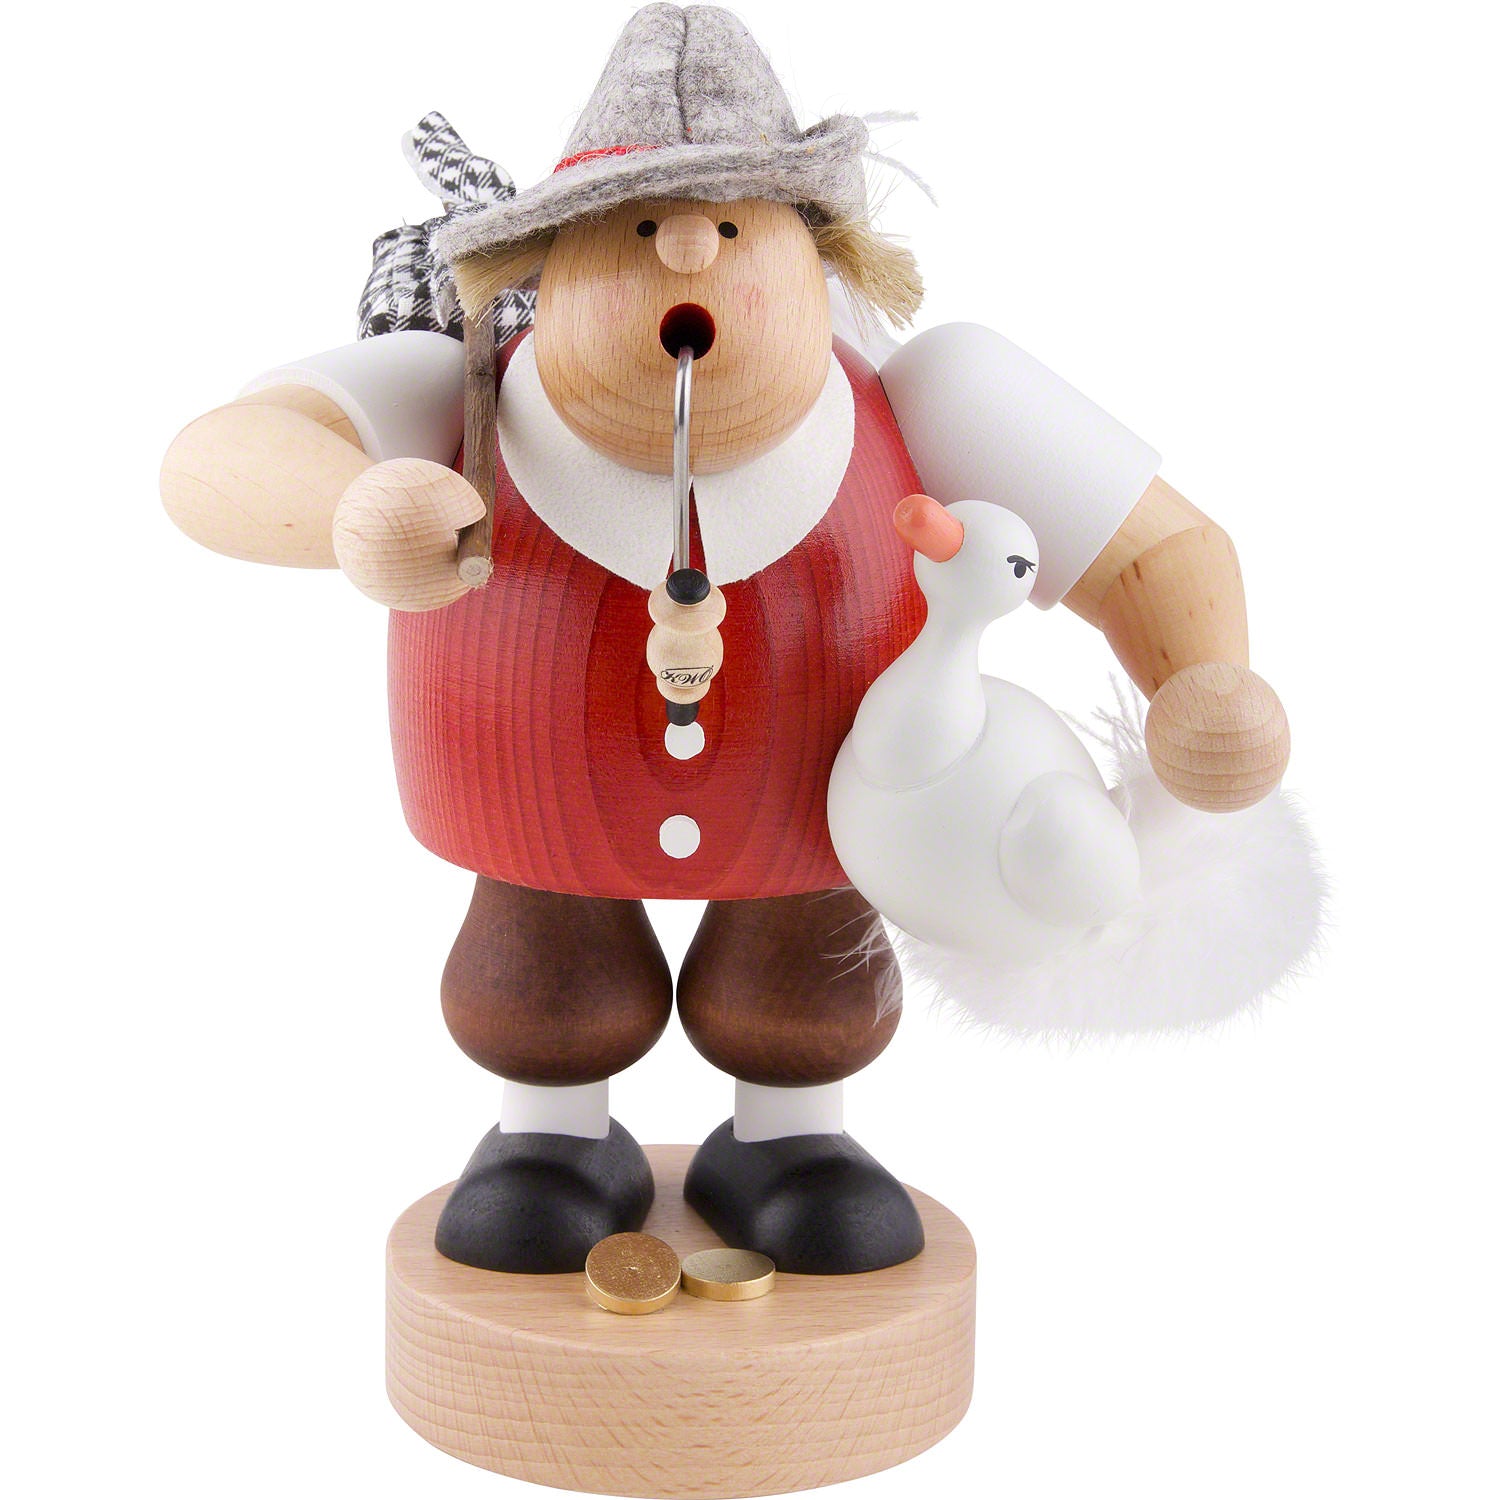 Hans in Luck Incense Smoker by KWO